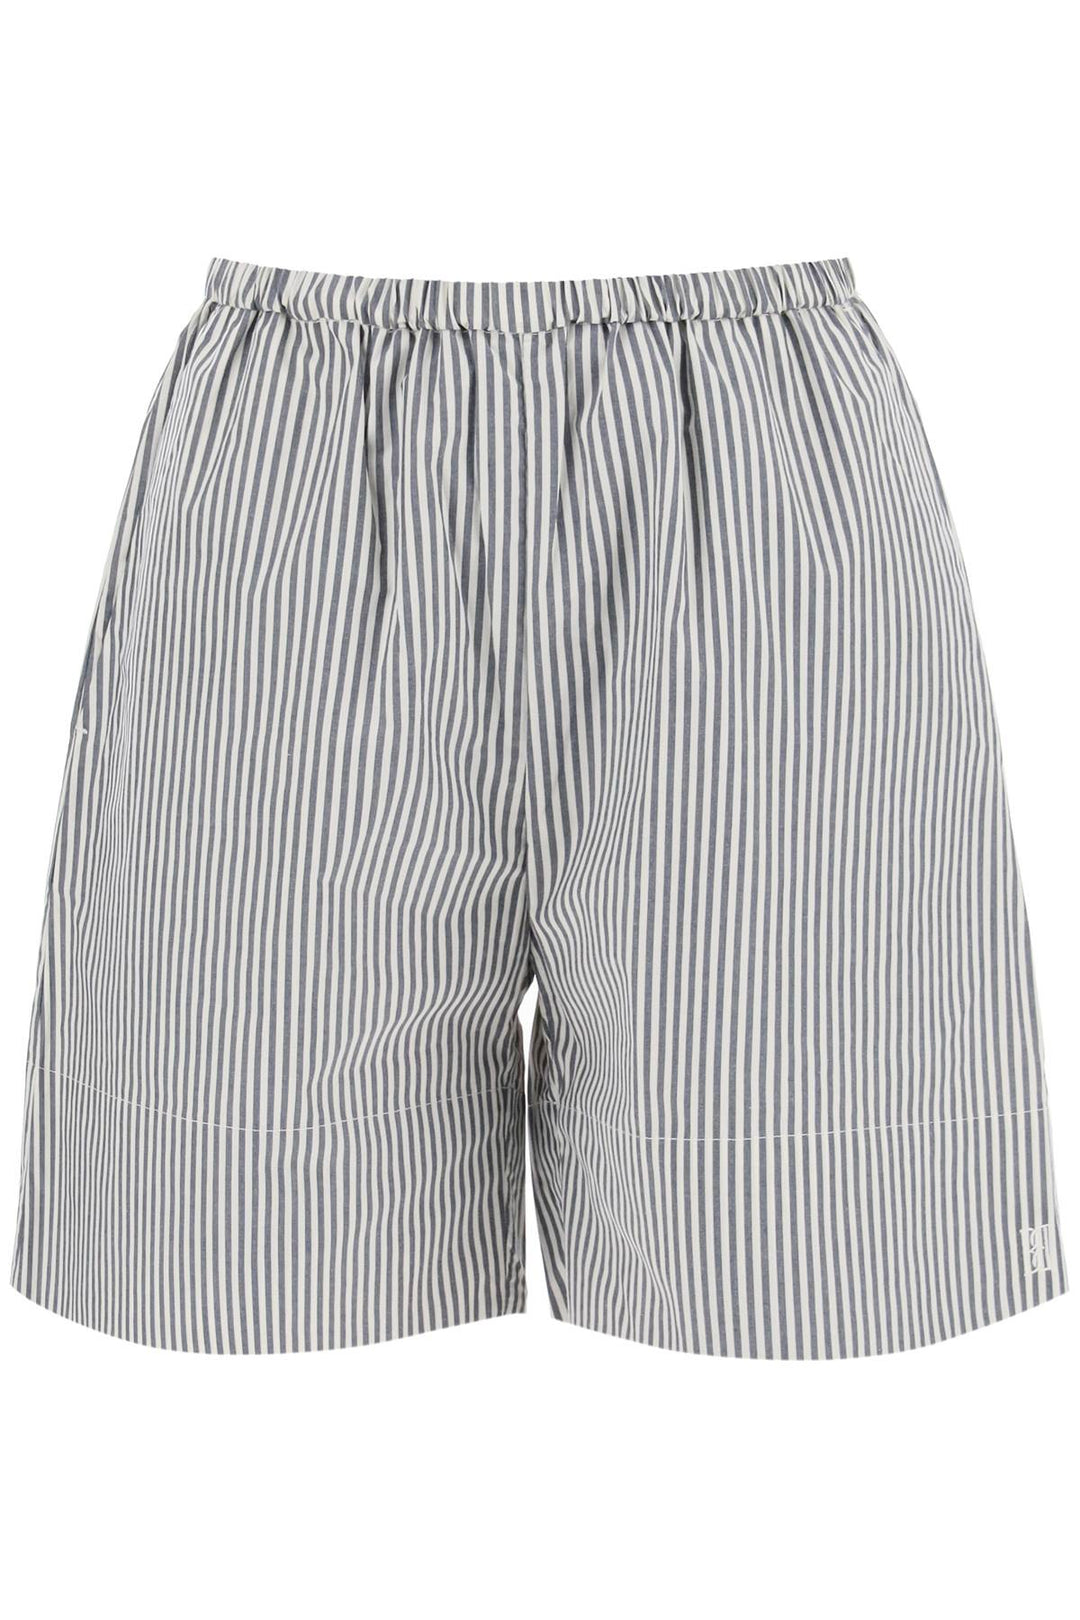 By Malene Birger Replace With Double Quotestriped Siona Organic Cotton Shortsreplace With Double Quote   Blu